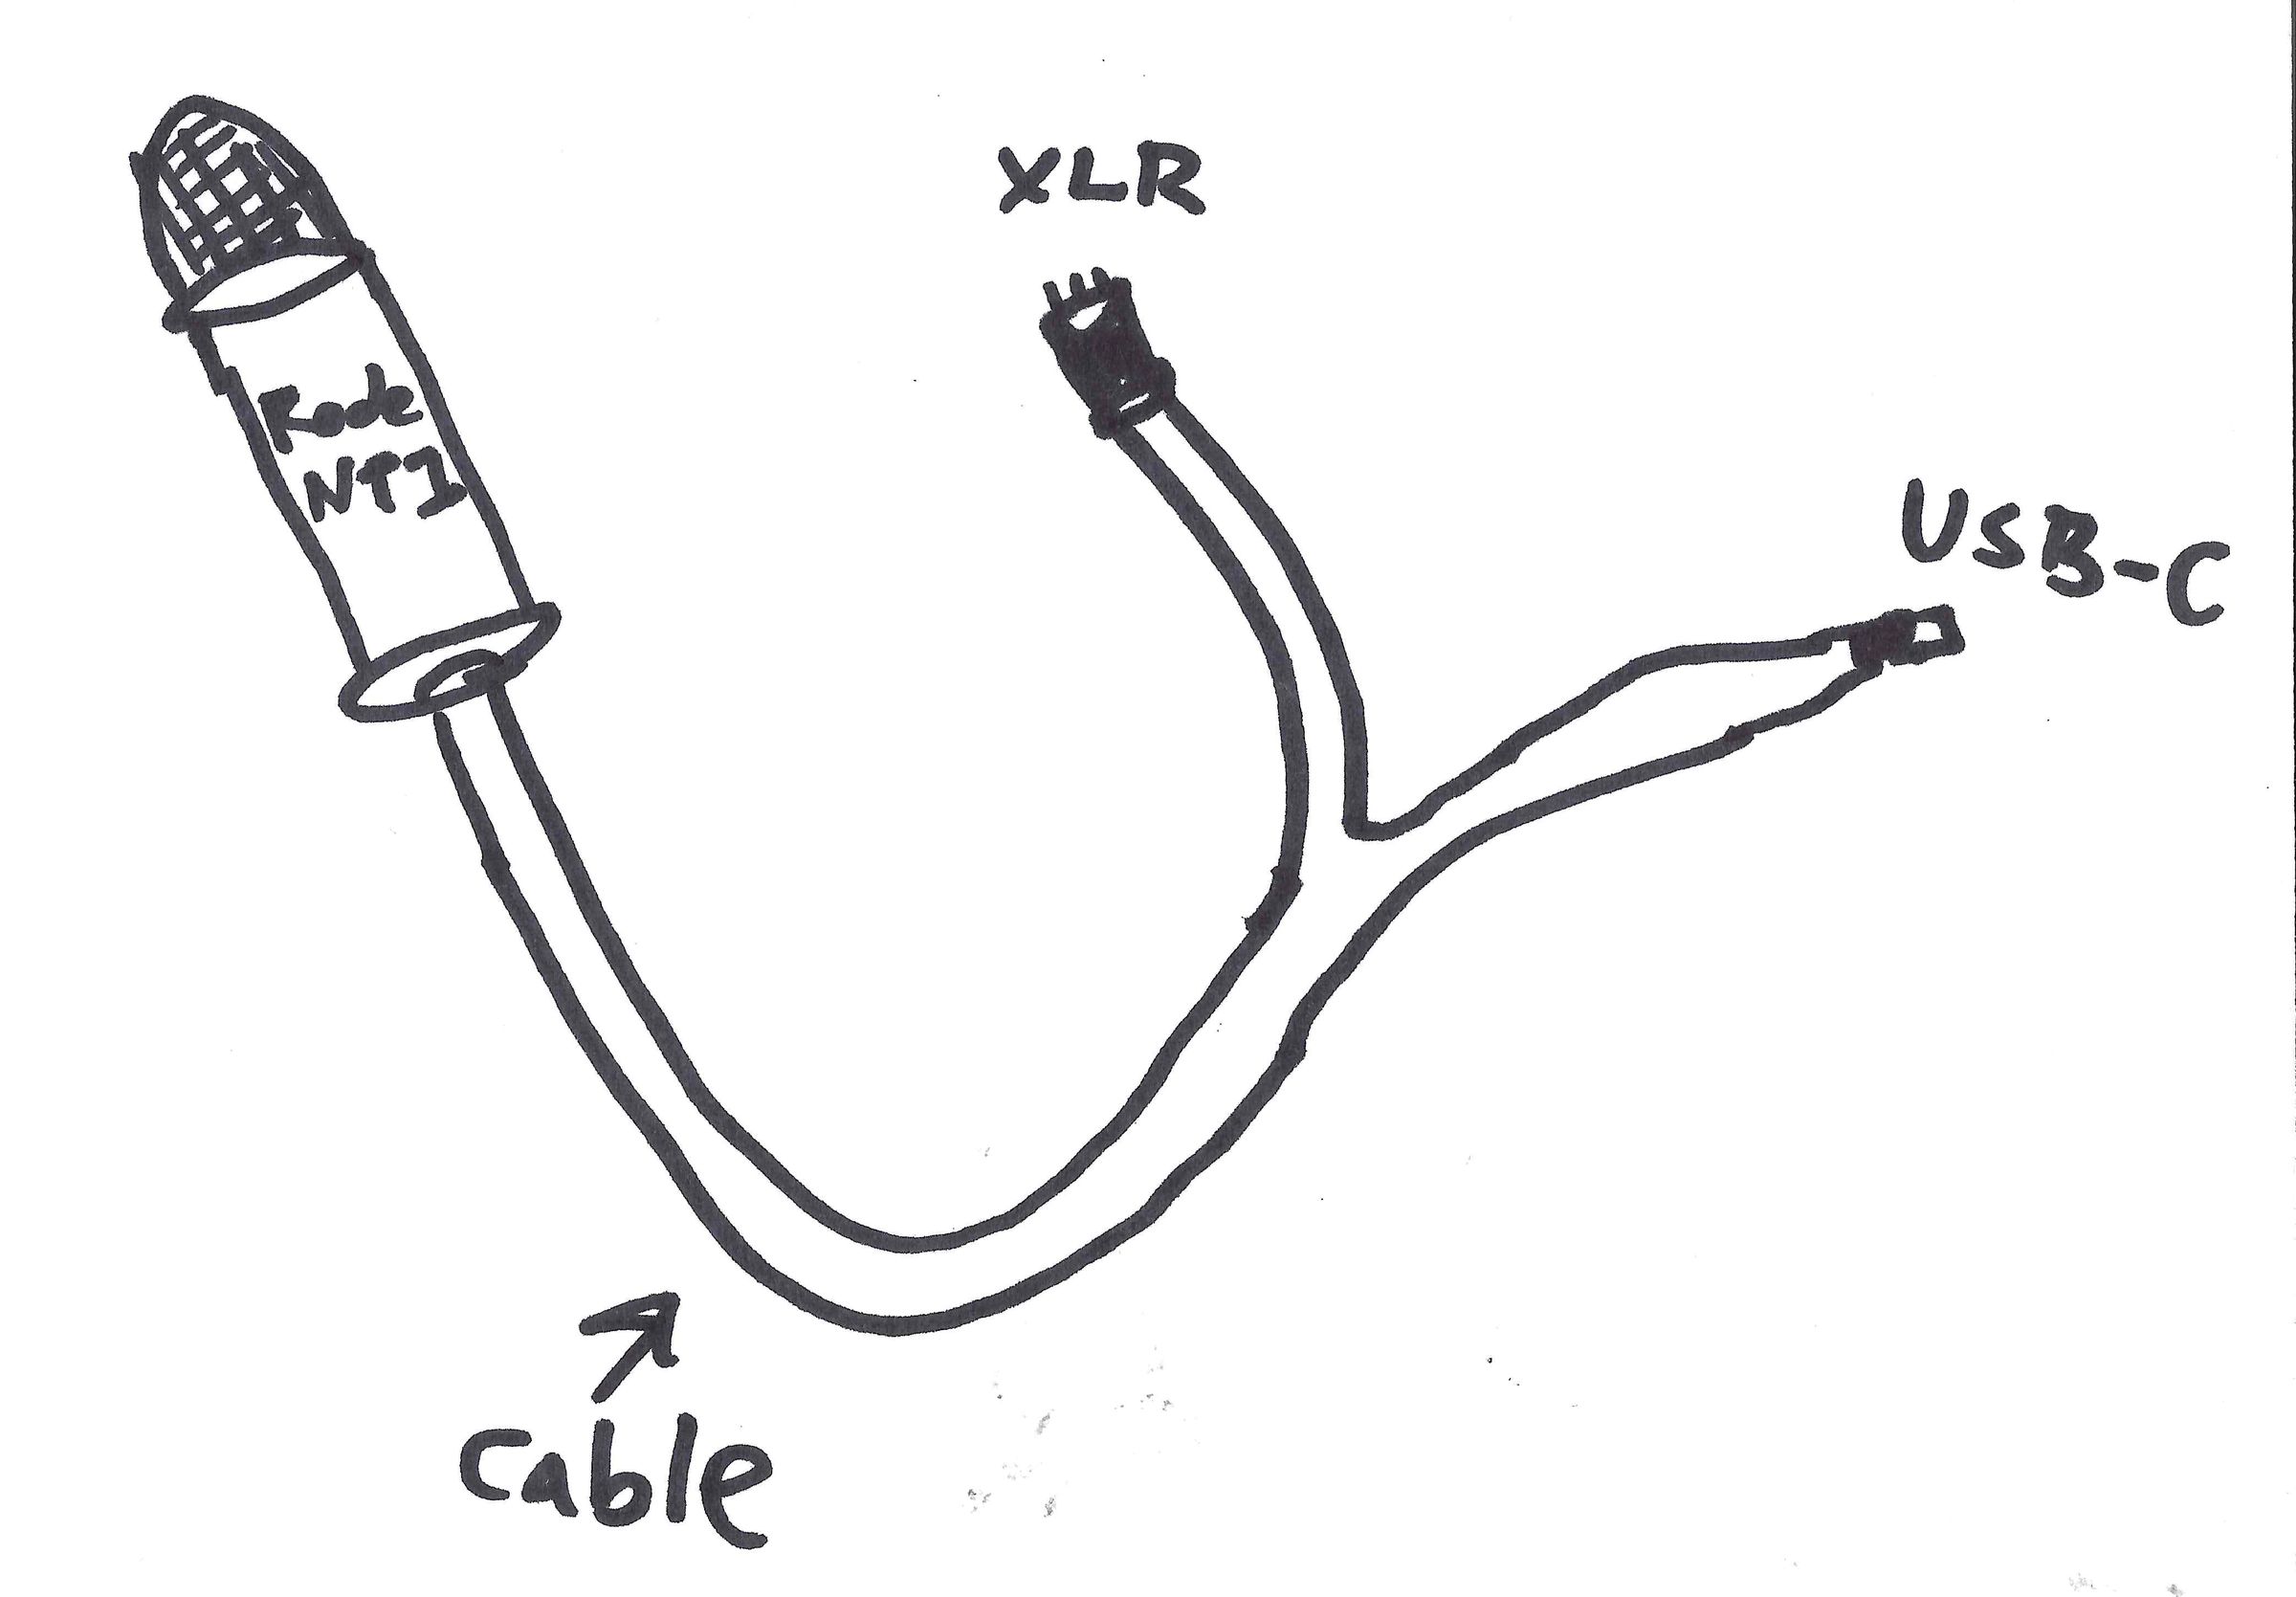 A mediocre drawing of a custom cable, where one end plugs into the Rode NT1, and the other end splits off into an XLR end and a USB-C end